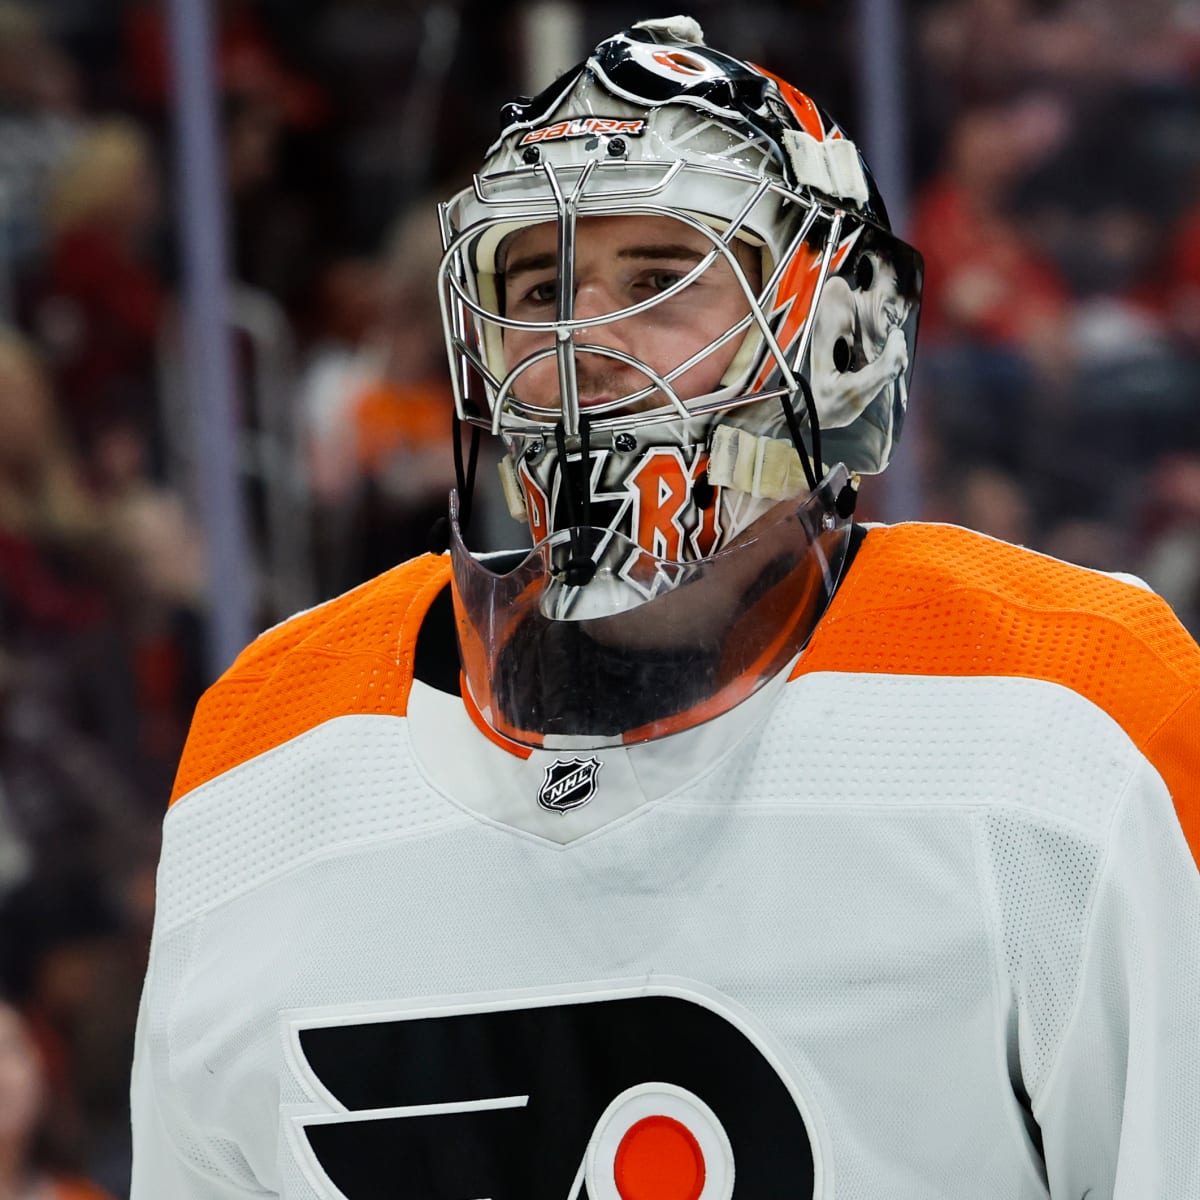 What if the Flyers traded Carter Hart? – FLYERS NITTY GRITTY